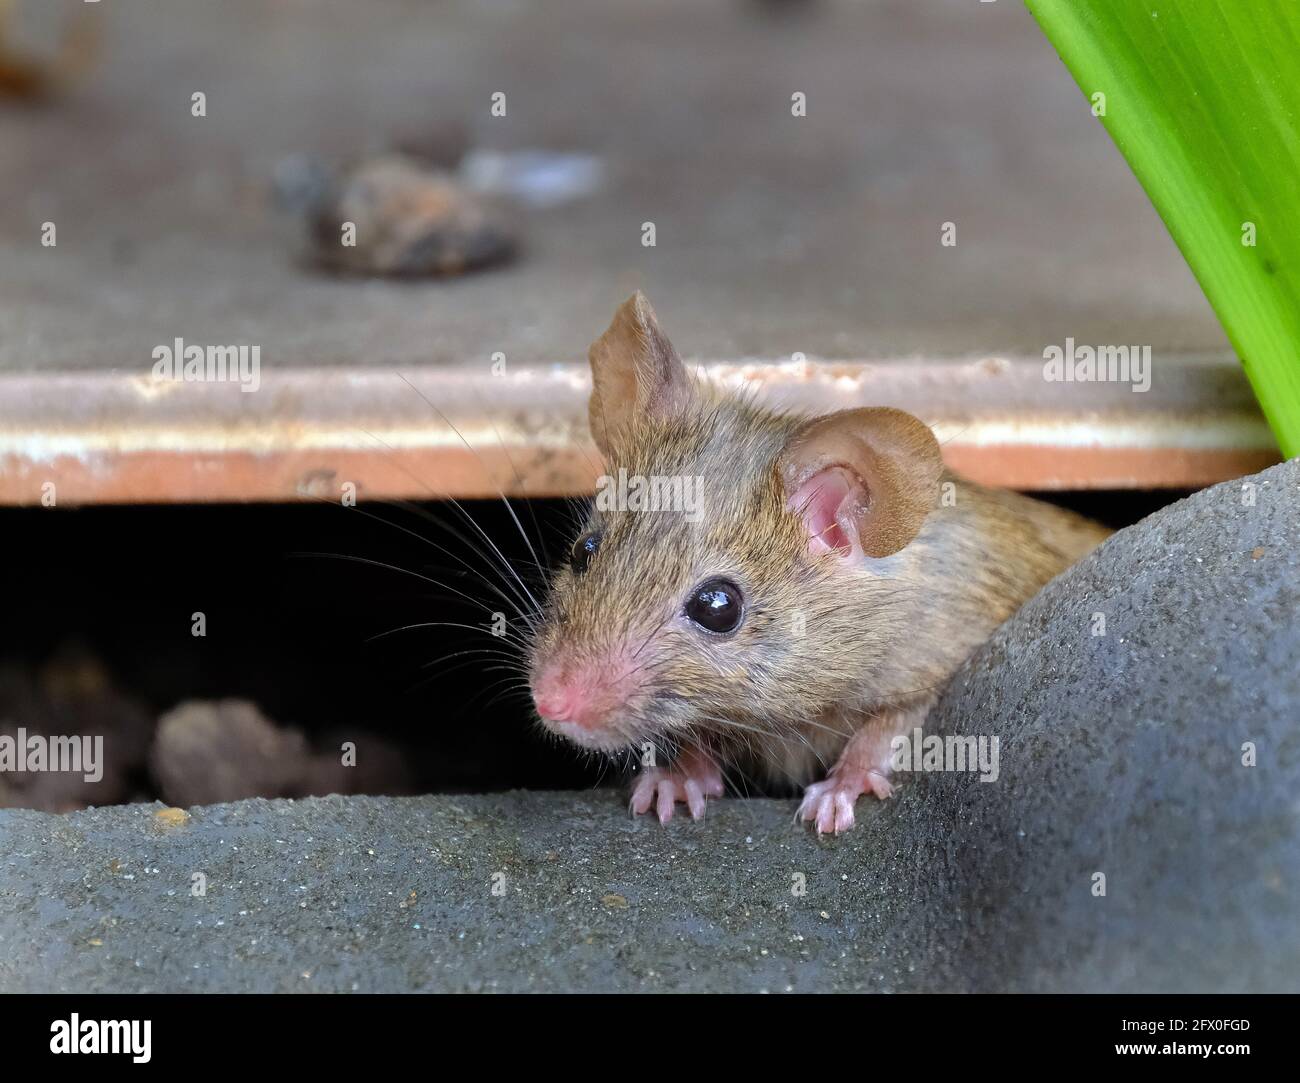 The house mouse is a small mammal of the order Rodentia, characteristically having a pointed snout, large rounded ears, and a long and hairy tail. Stock Photo